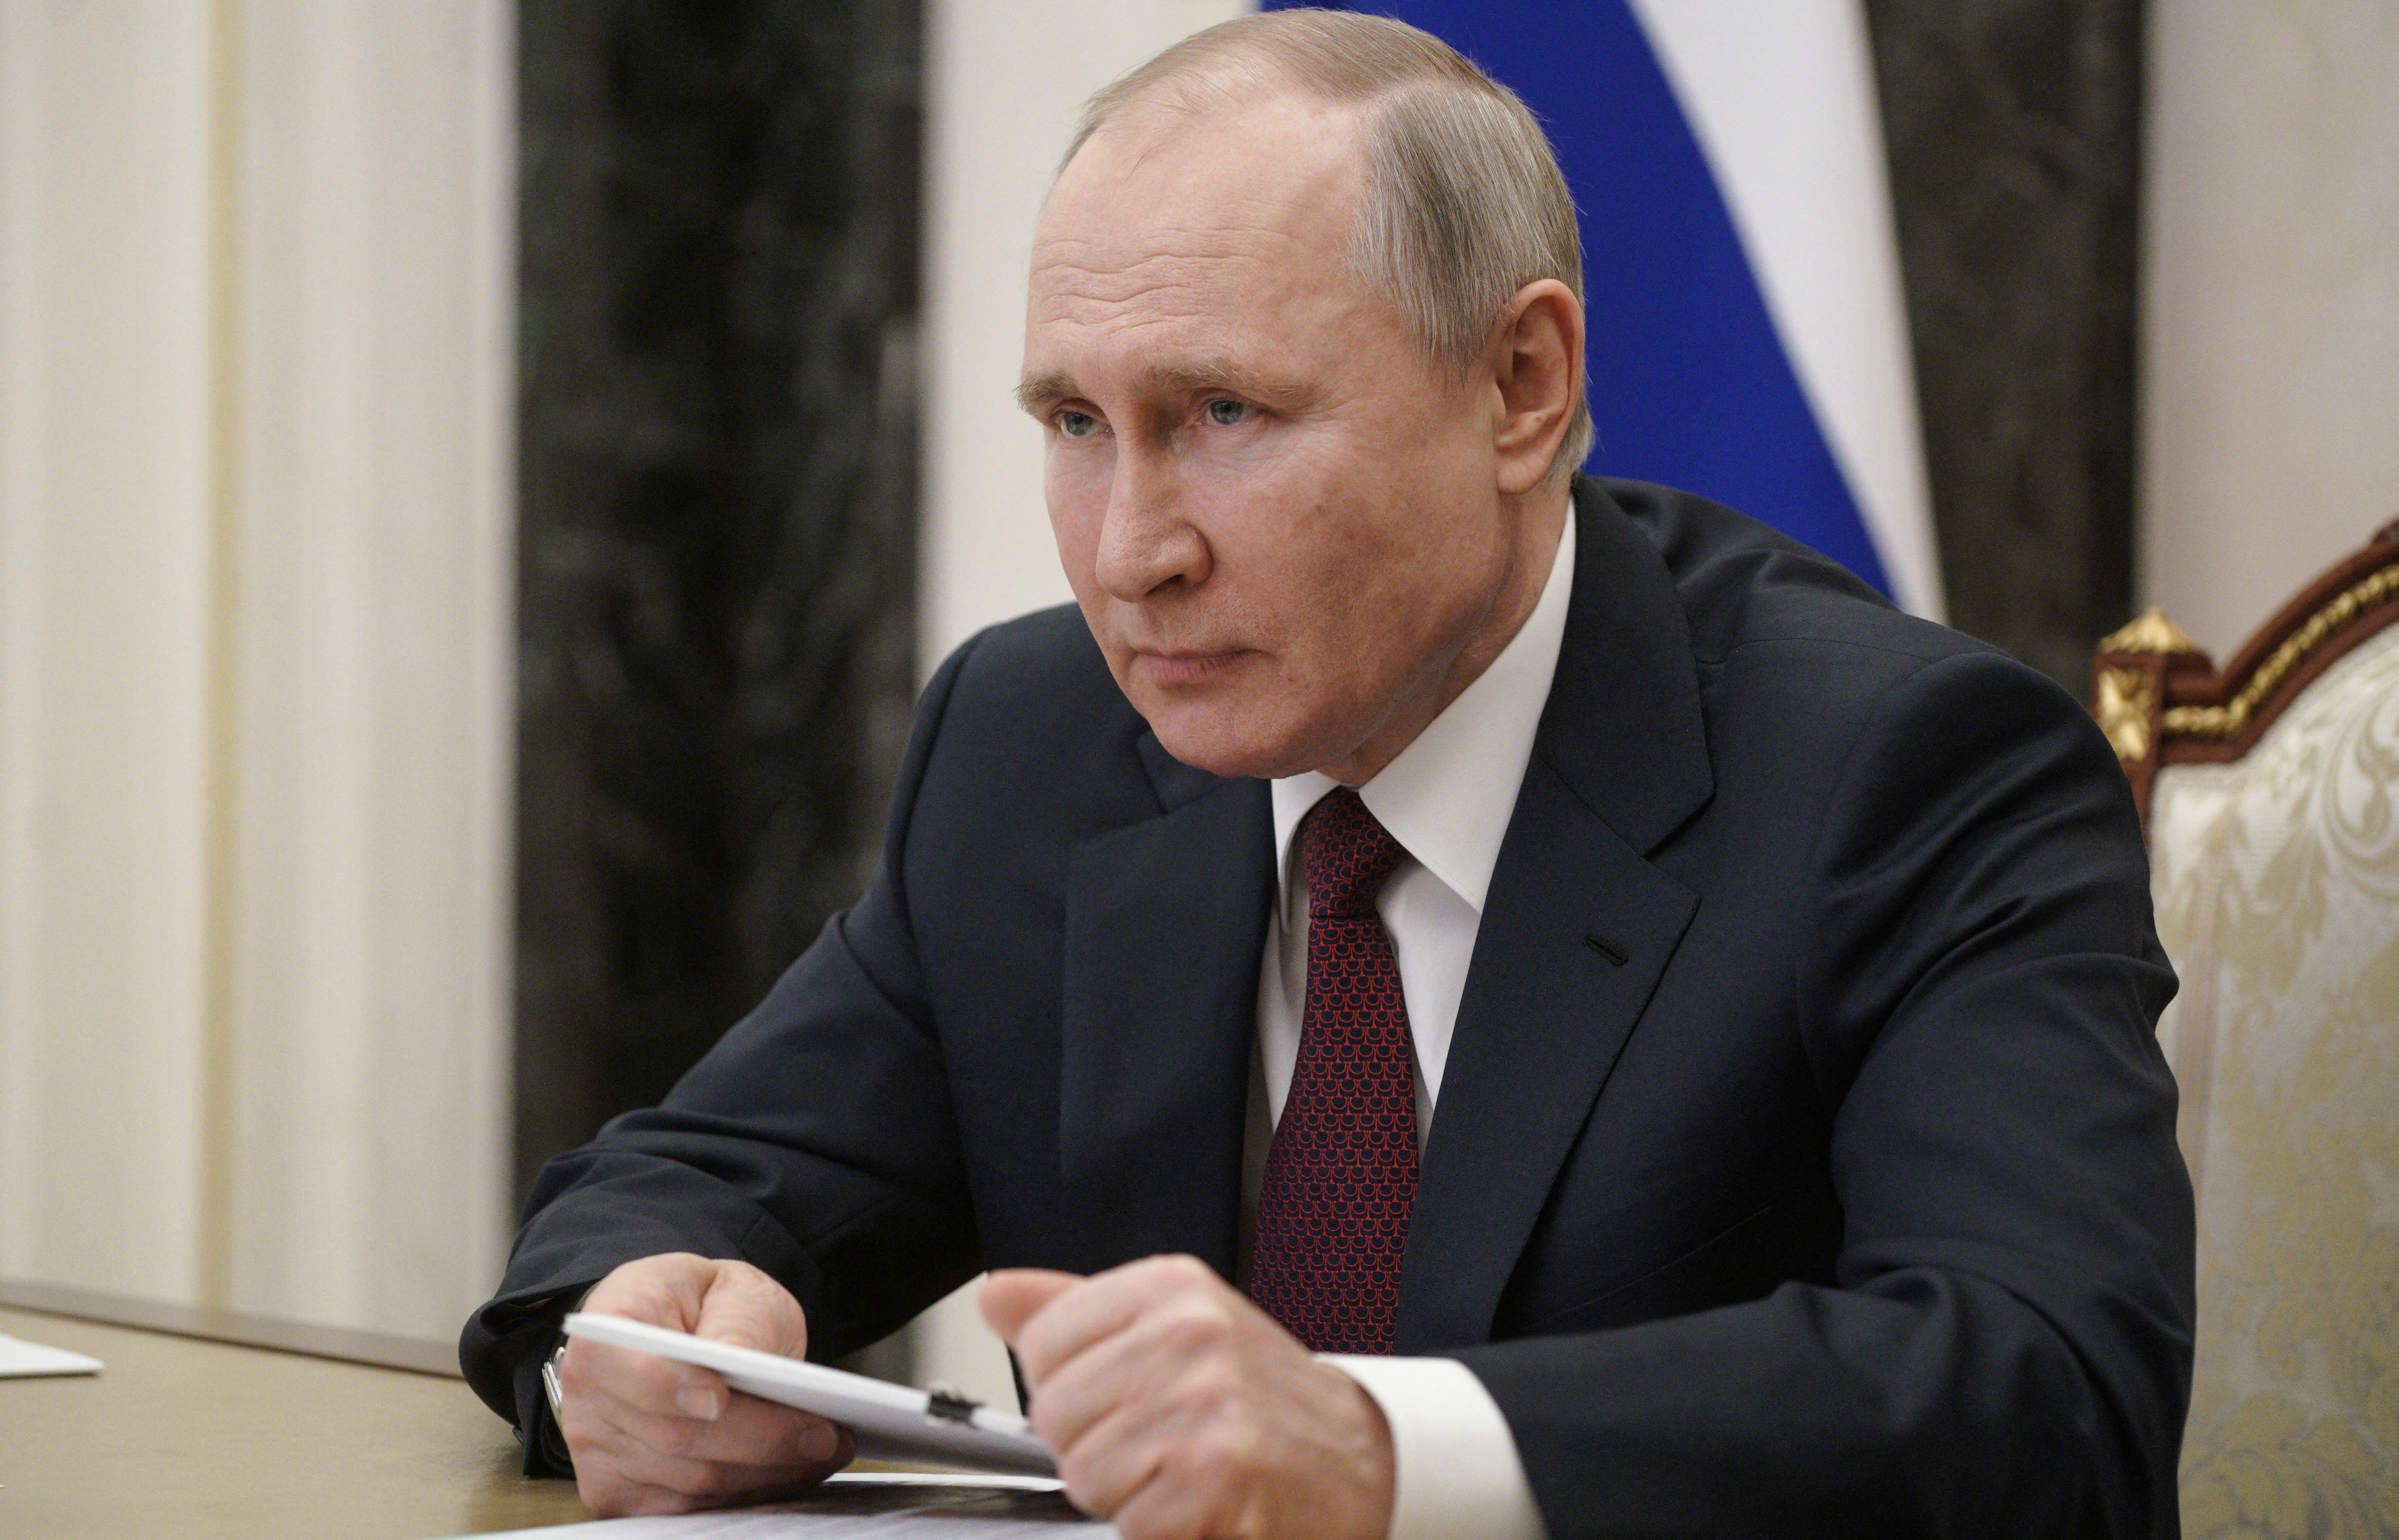 Russian President Vladimir Putin attends a meeting on social and economic development of Crimea and Sevastopol, via teleconference call, at the Kremlin in Moscow, Russia.